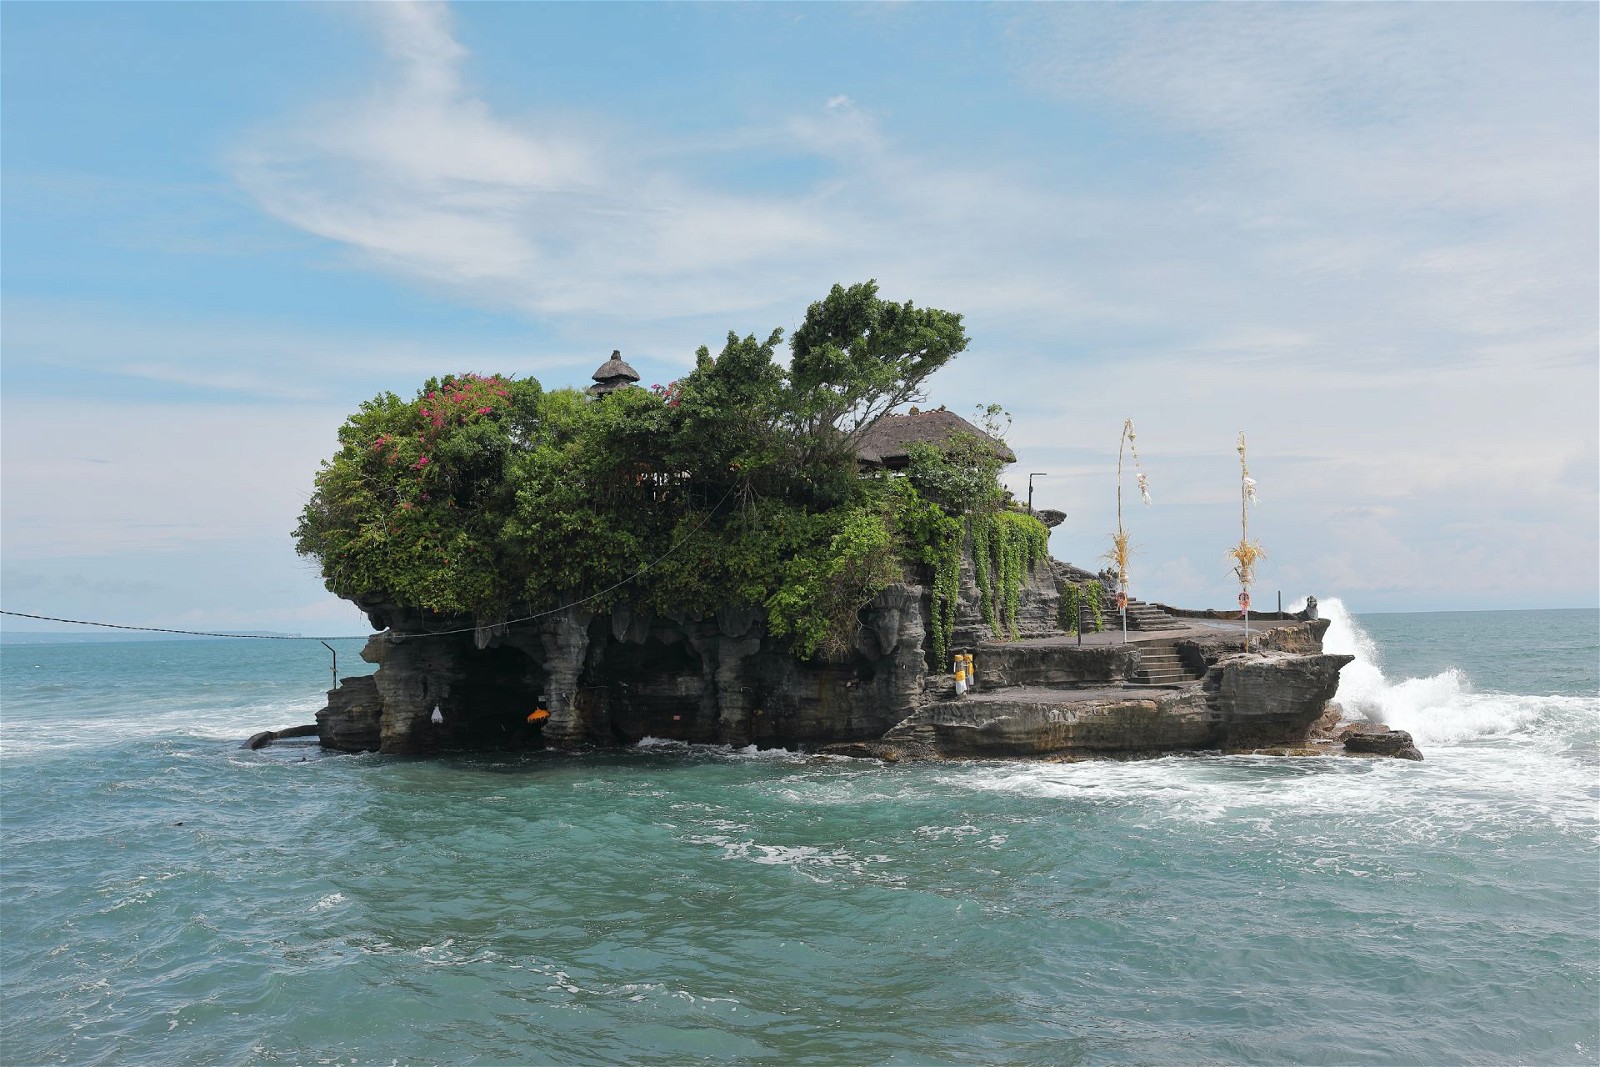 One of Bali's most iconic landmarks, Tanah Lot Temple is perched on a rocky outcrop surrounded by the Indian Ocean